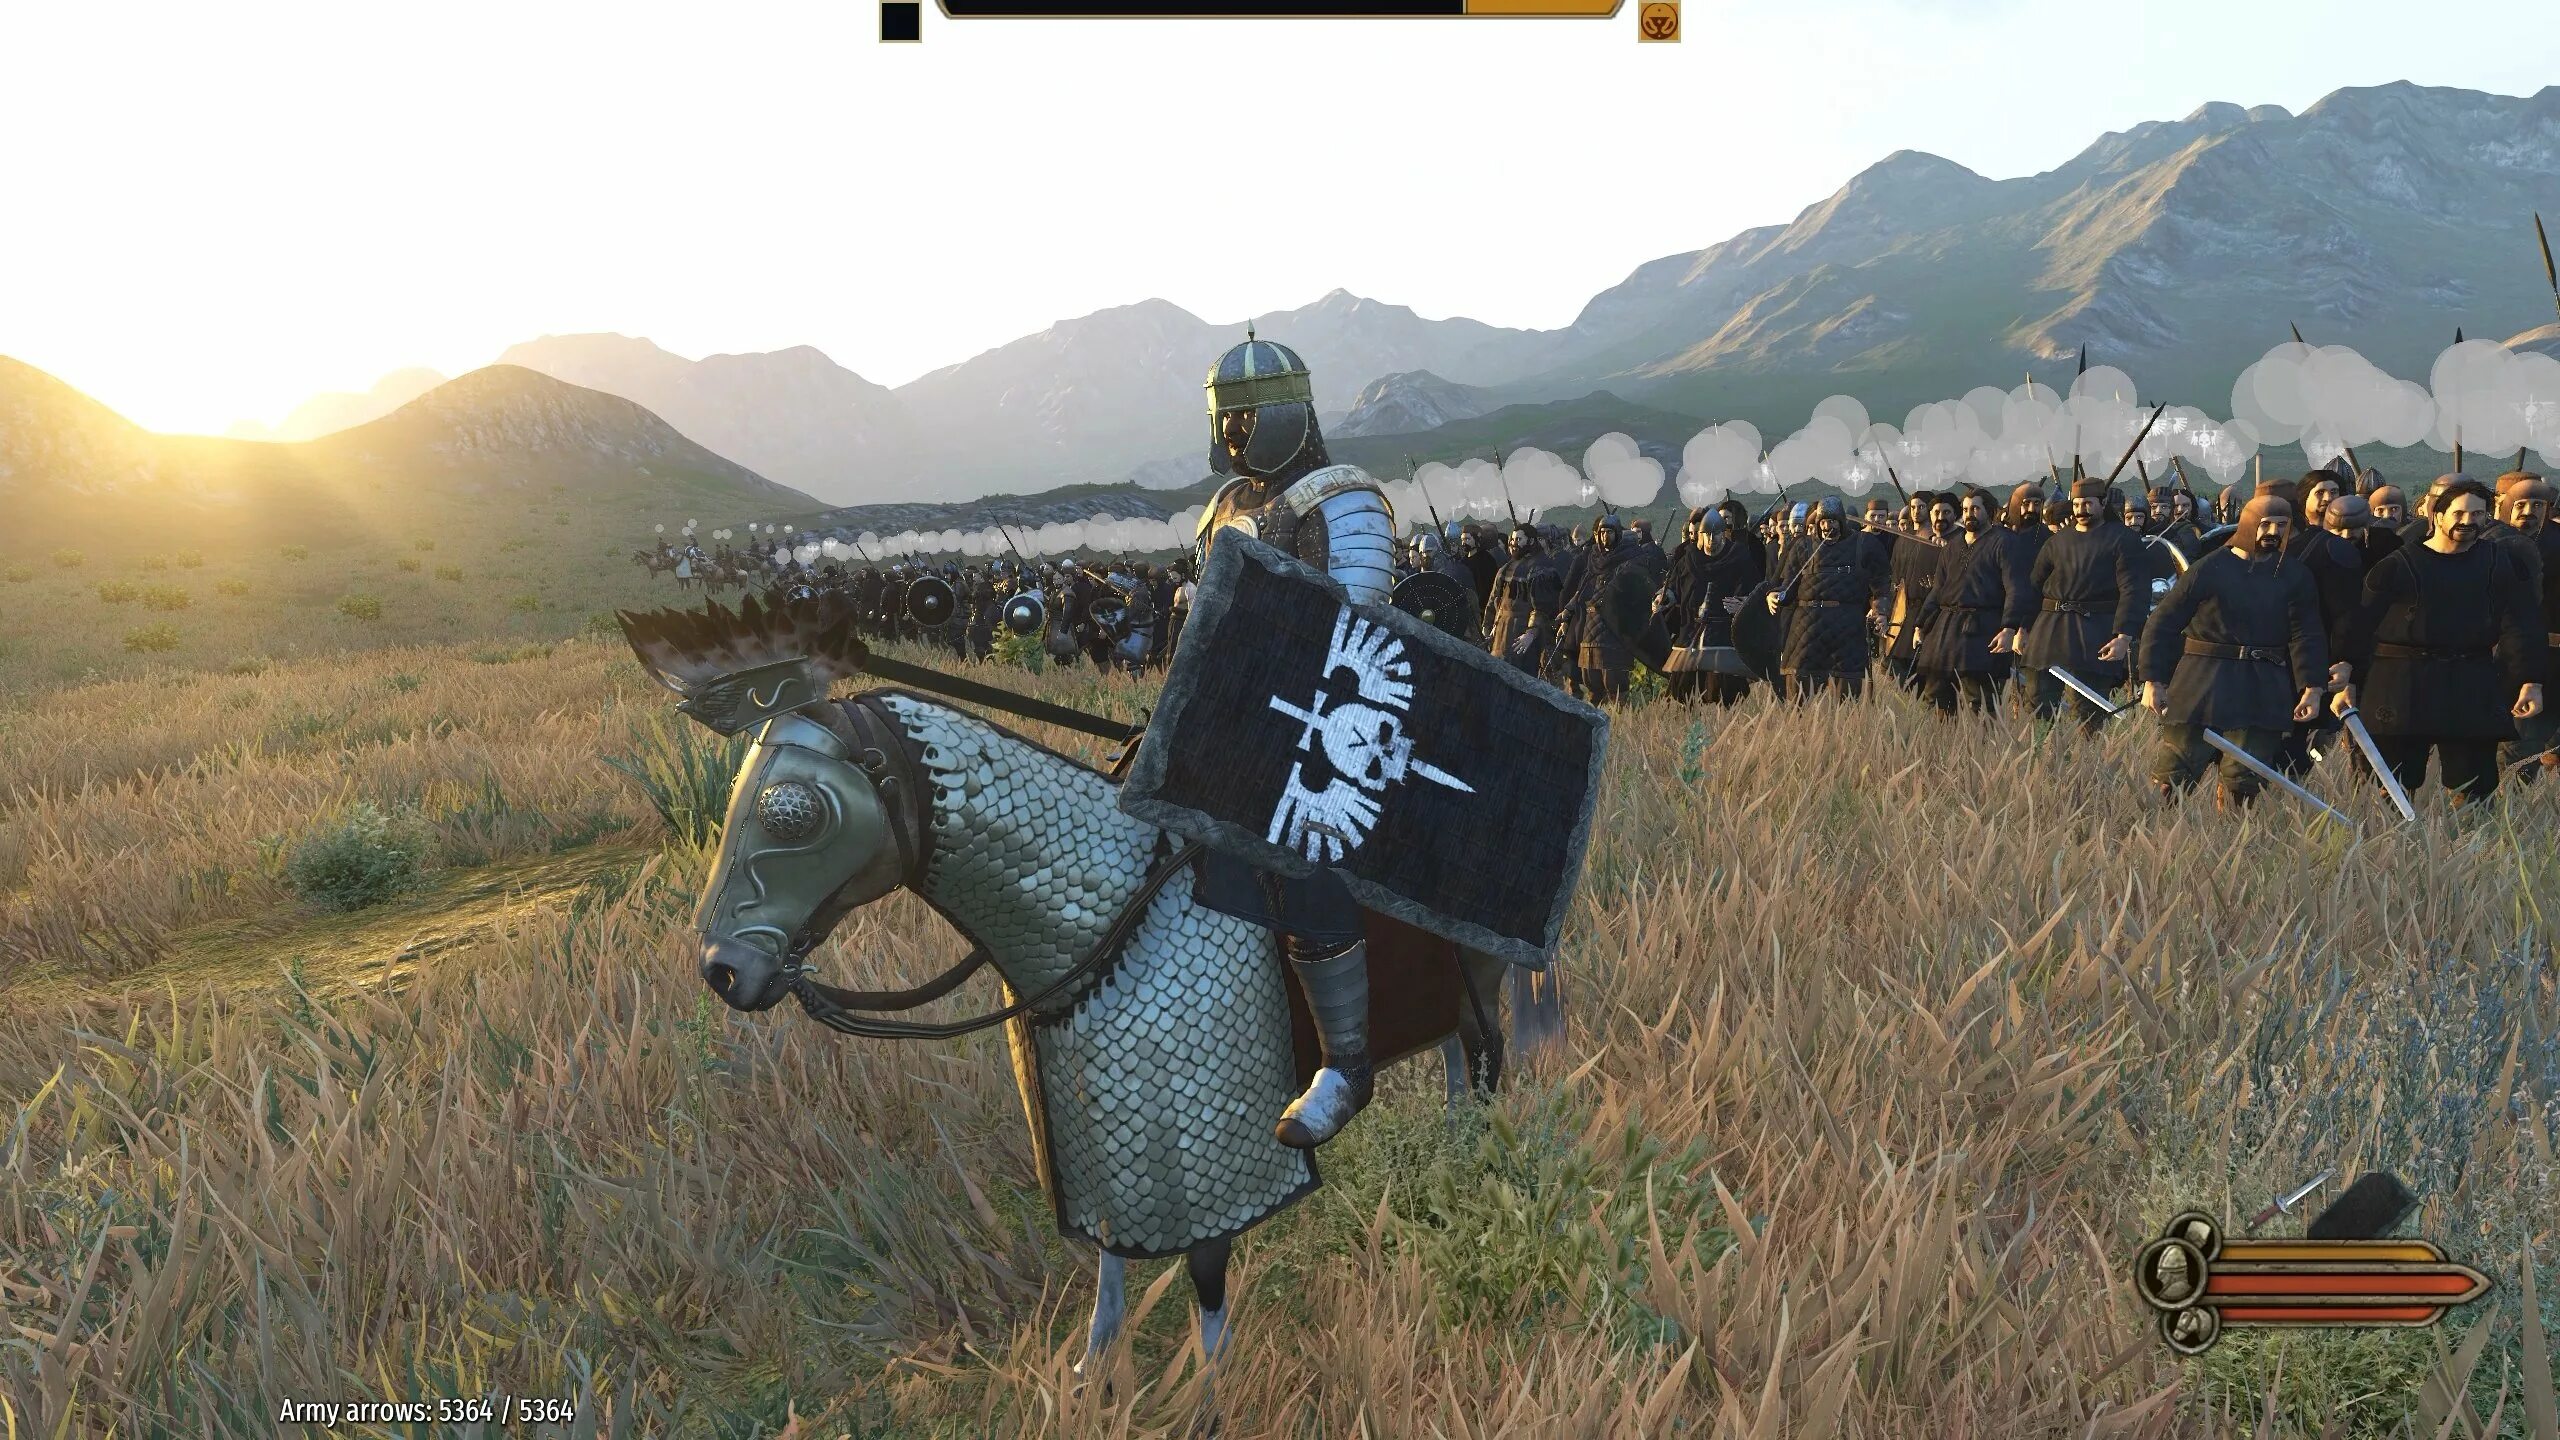 Mount and Blade 2. Mount and Blade 2 Bannerlord. Маунт энд блейд баннерлорд. Мир Маунт энд блейд. Сборка bannerlord 1.2 9